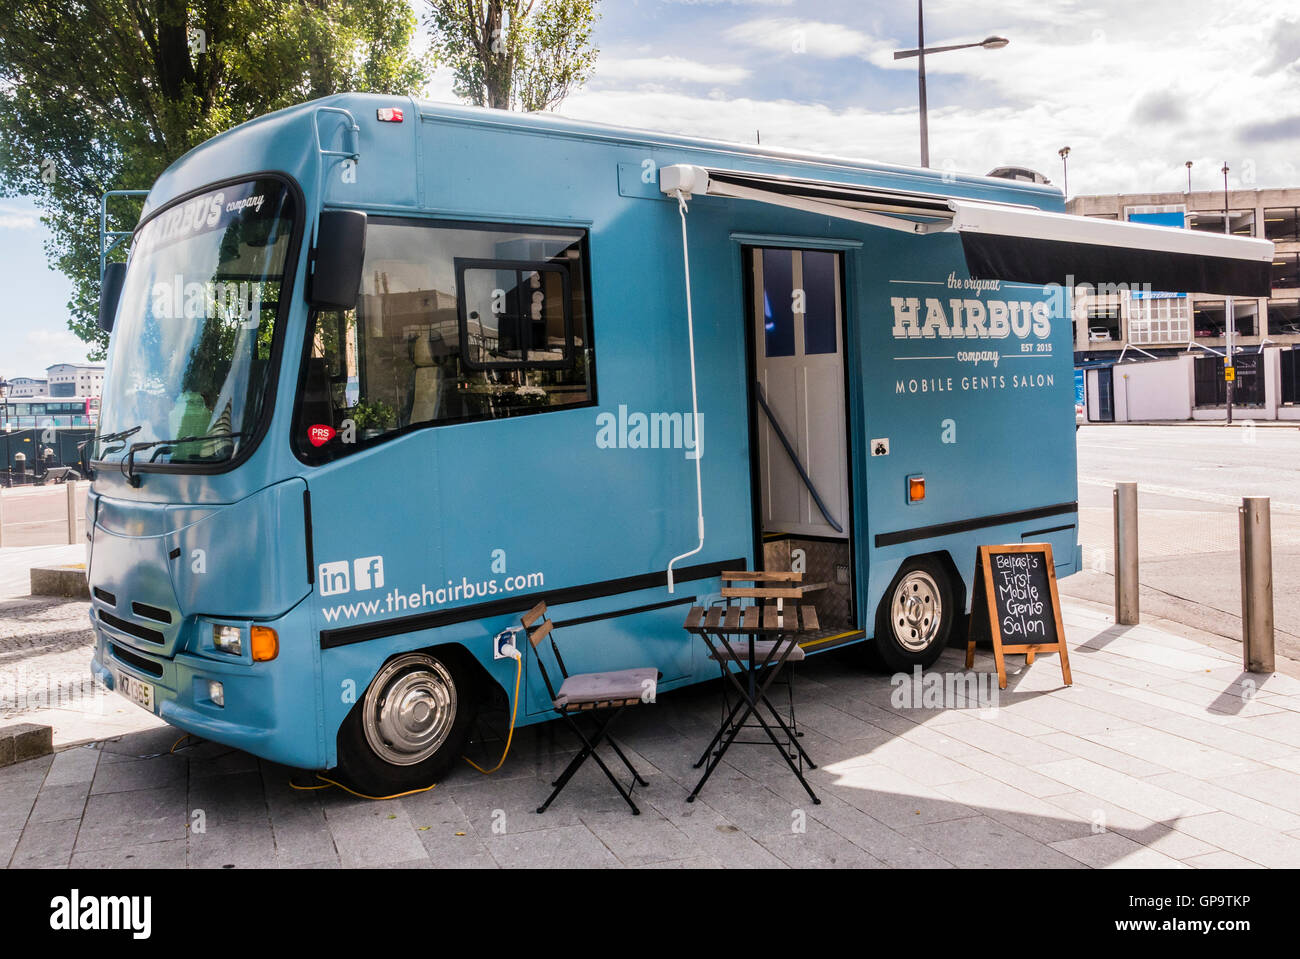 The Original Hairbus, a mobile barbers shop male grooming salon in a van, Belfast Stock Photo